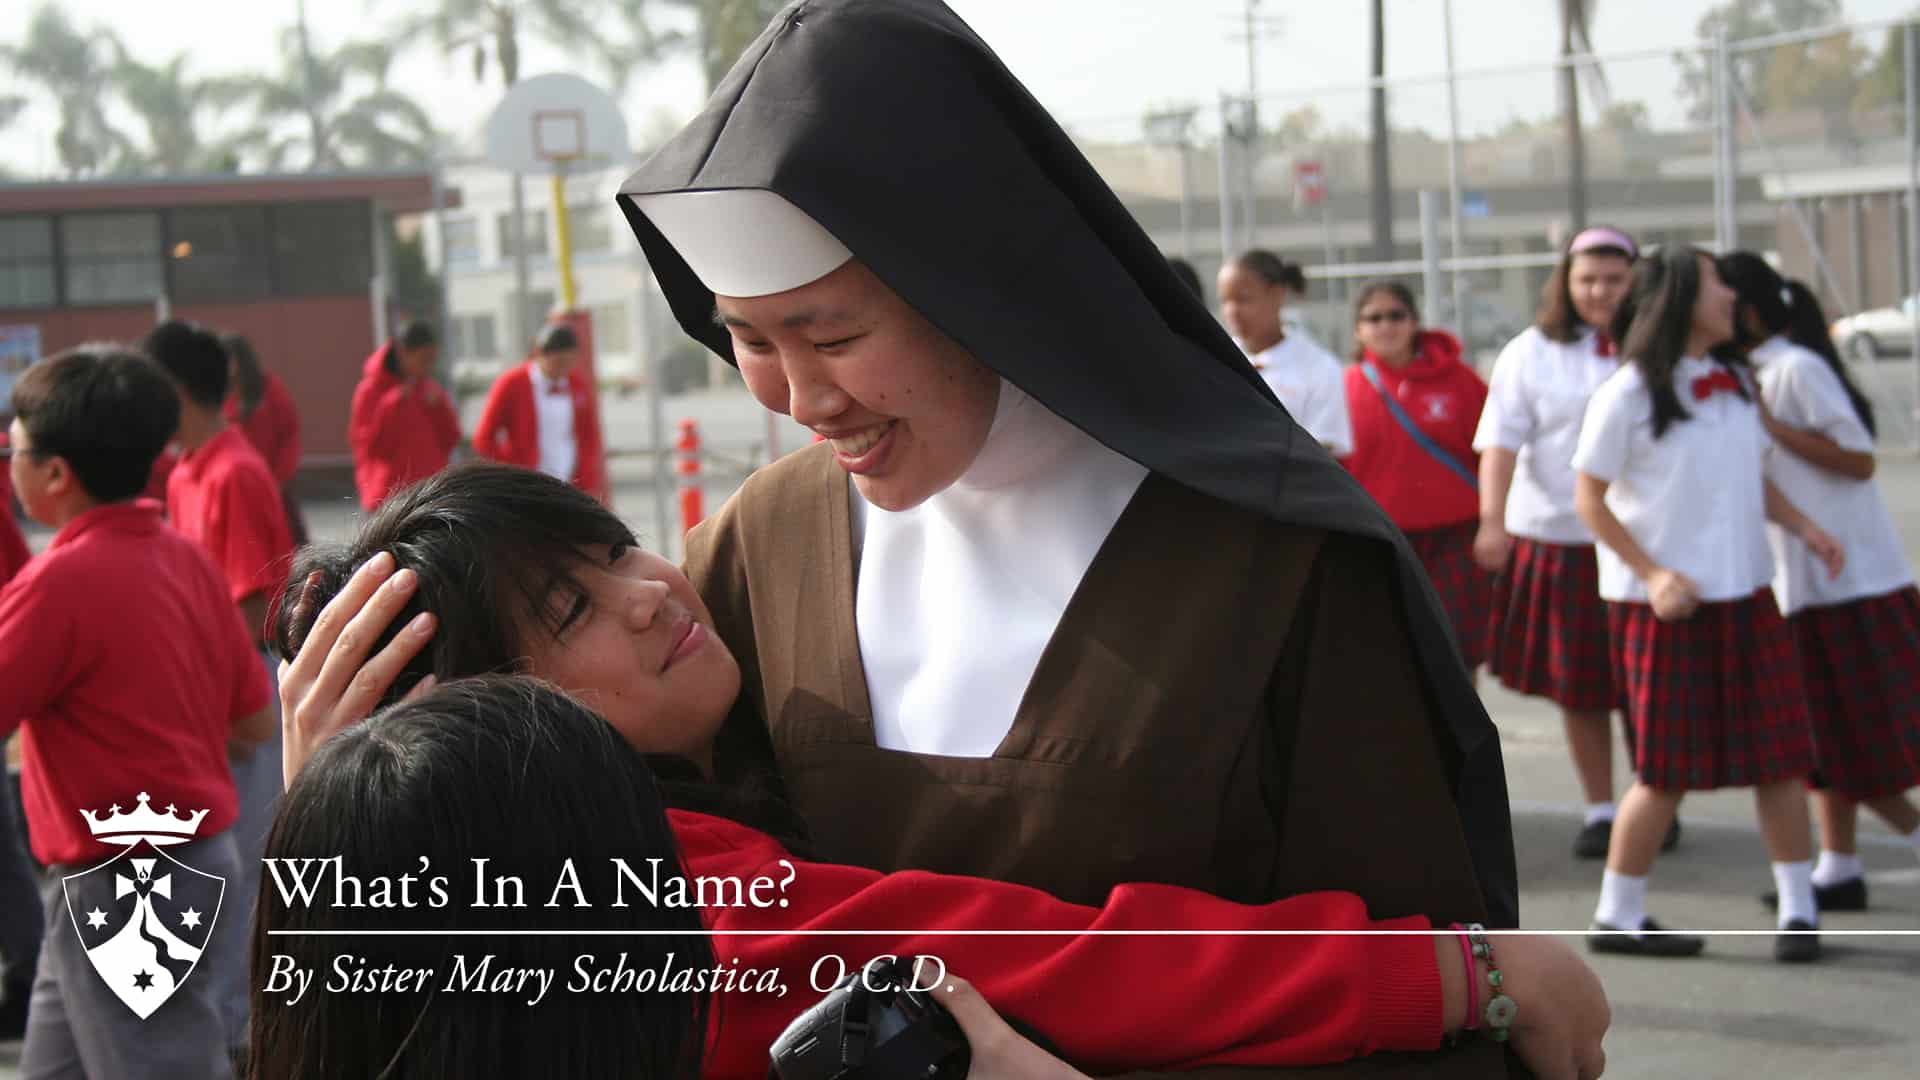 Sister hugging student with school kids outside, 'What's in A Name? By Sister Mary Scholastica, O.C.D.'